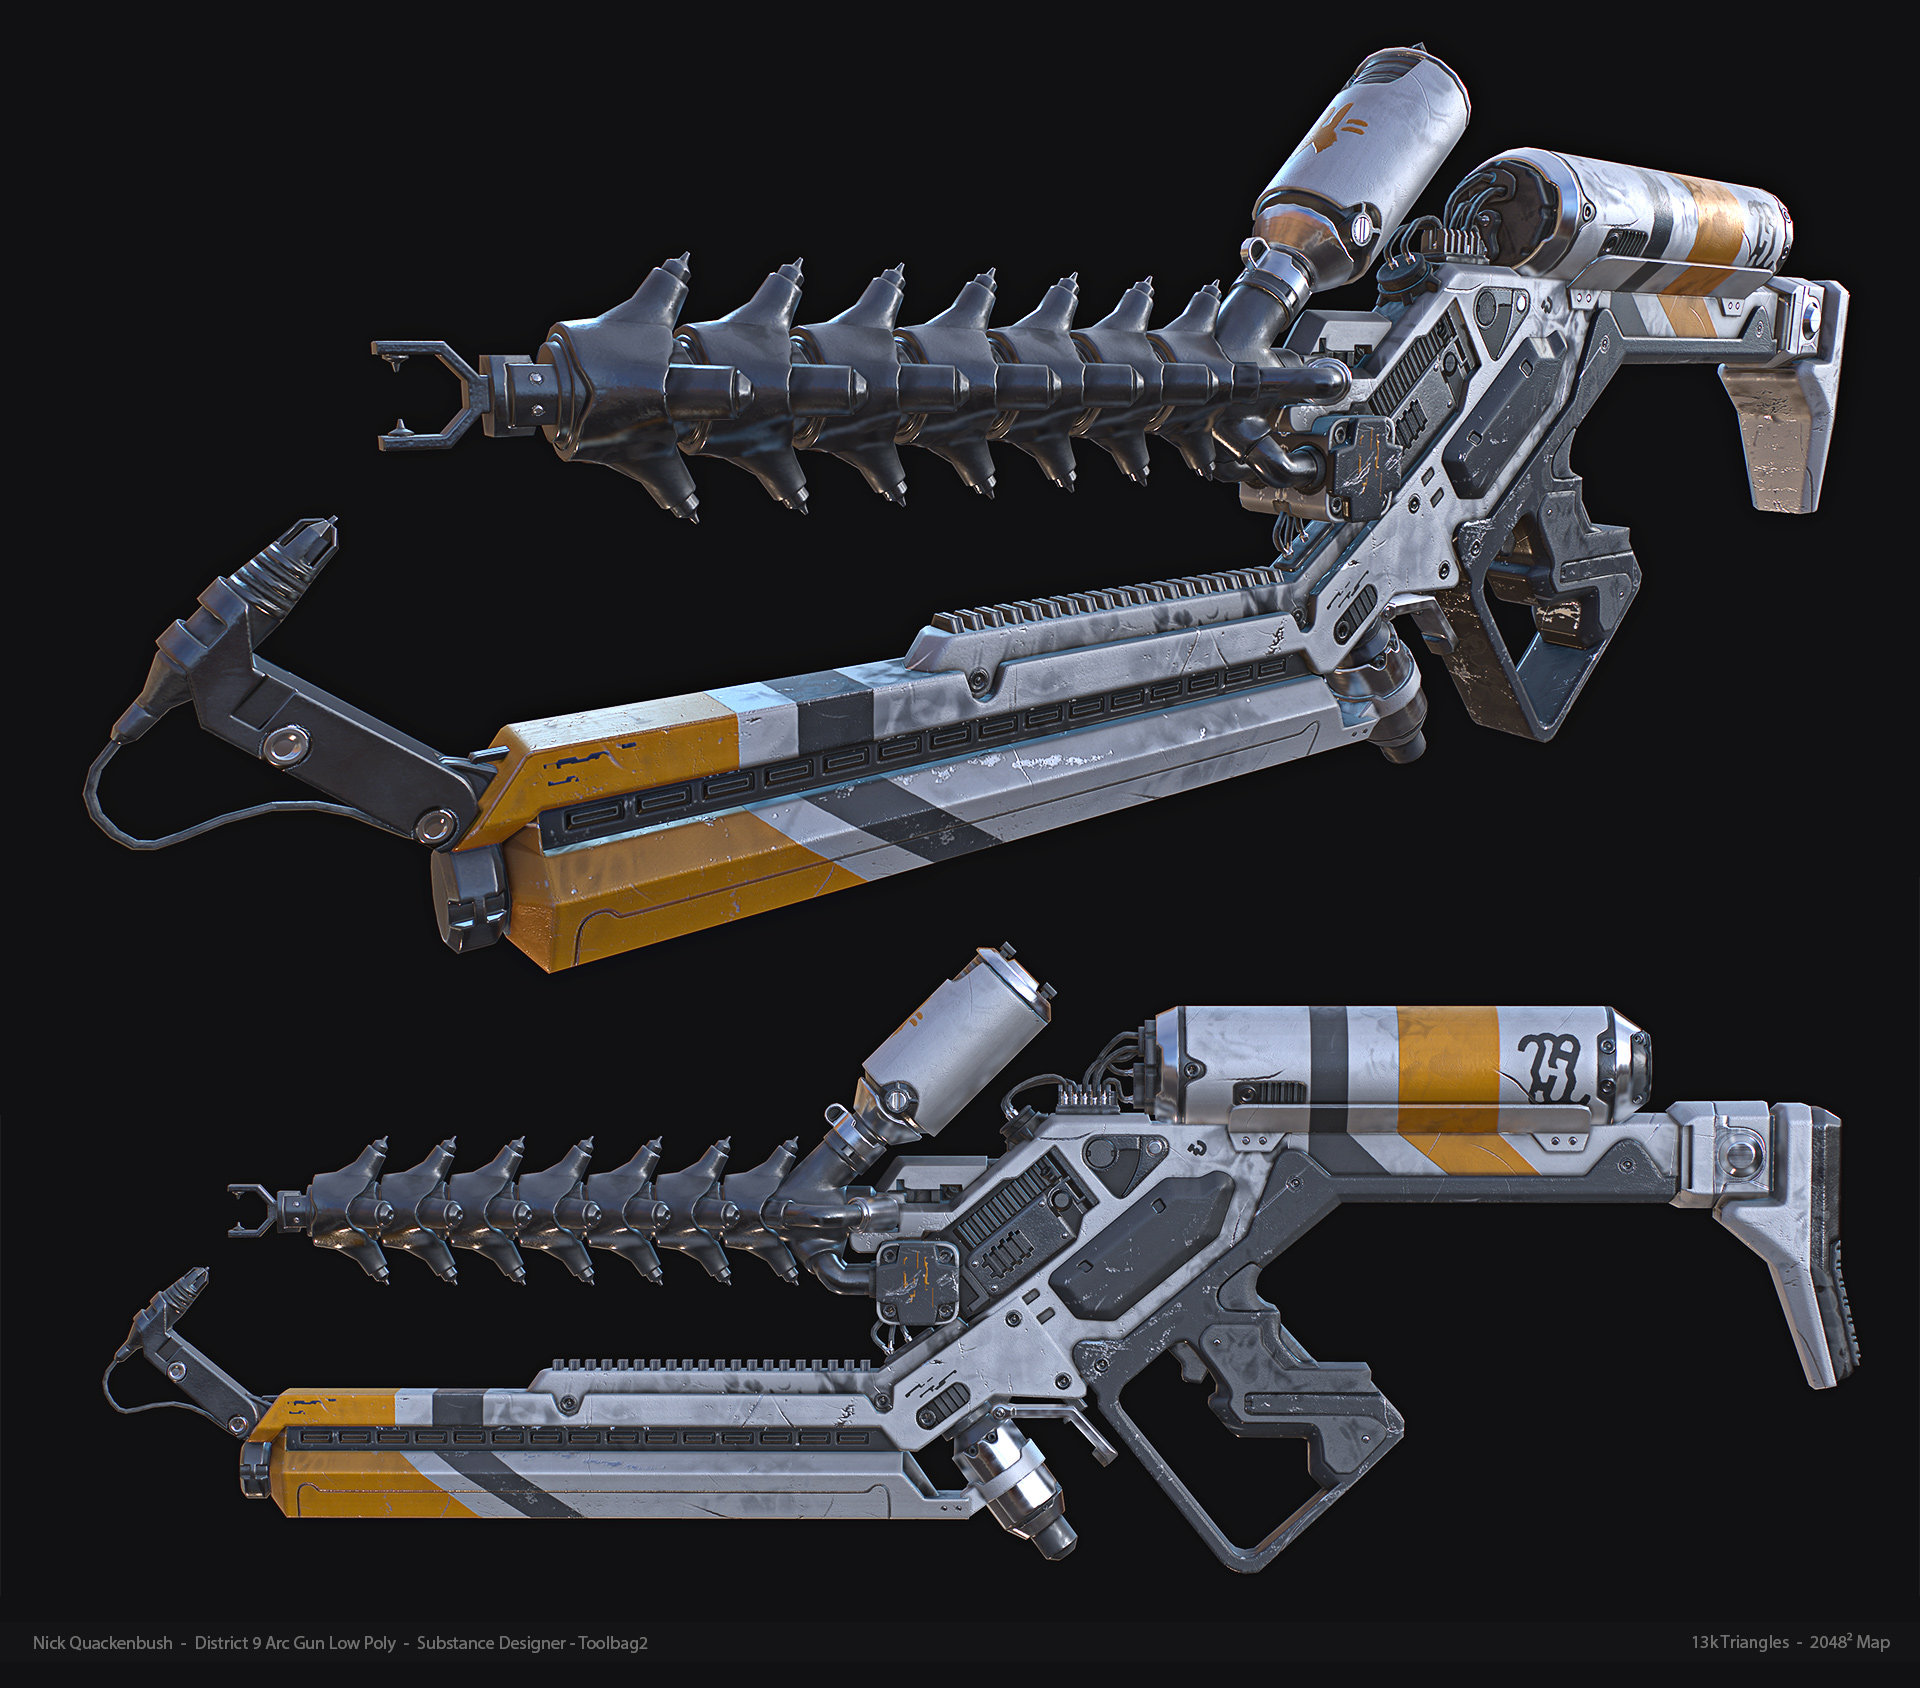 General 1920x1688 weapon movie sets District 9 concept art watermarked digital art simple background